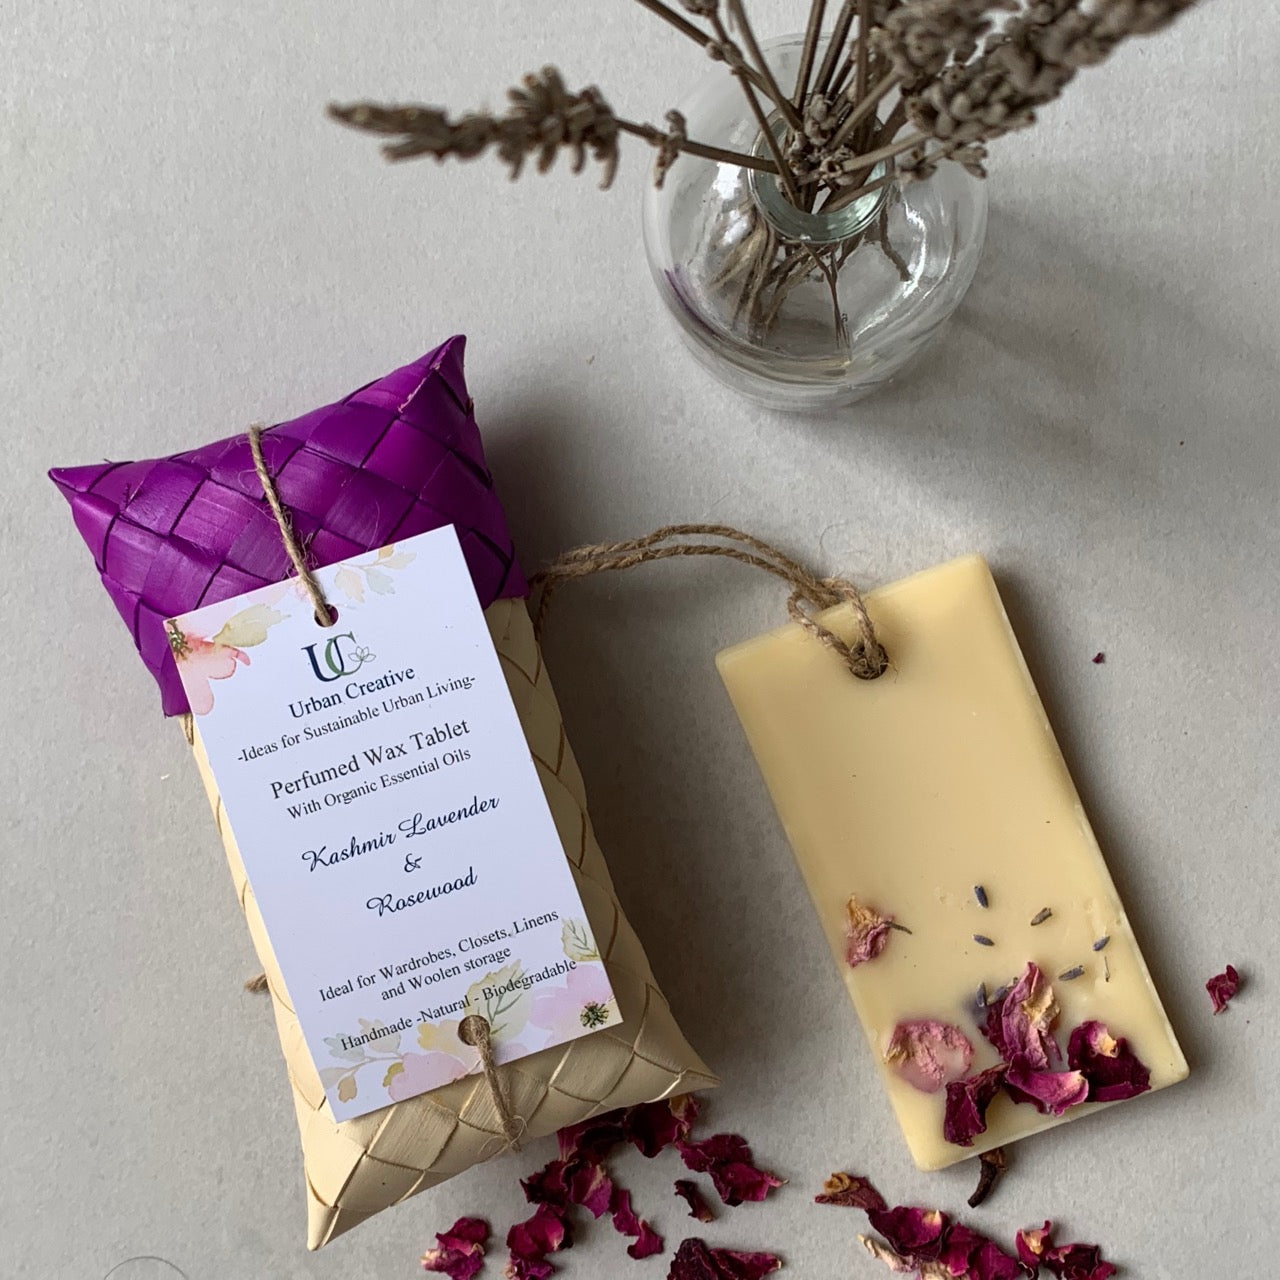 Natural Scented Wax Tablet - Kashmir Lavender & Rosewood Organic Essential Oils Infused In Beeswax - Single Scented Wax Tablet - Urban Creative - BeKarmic